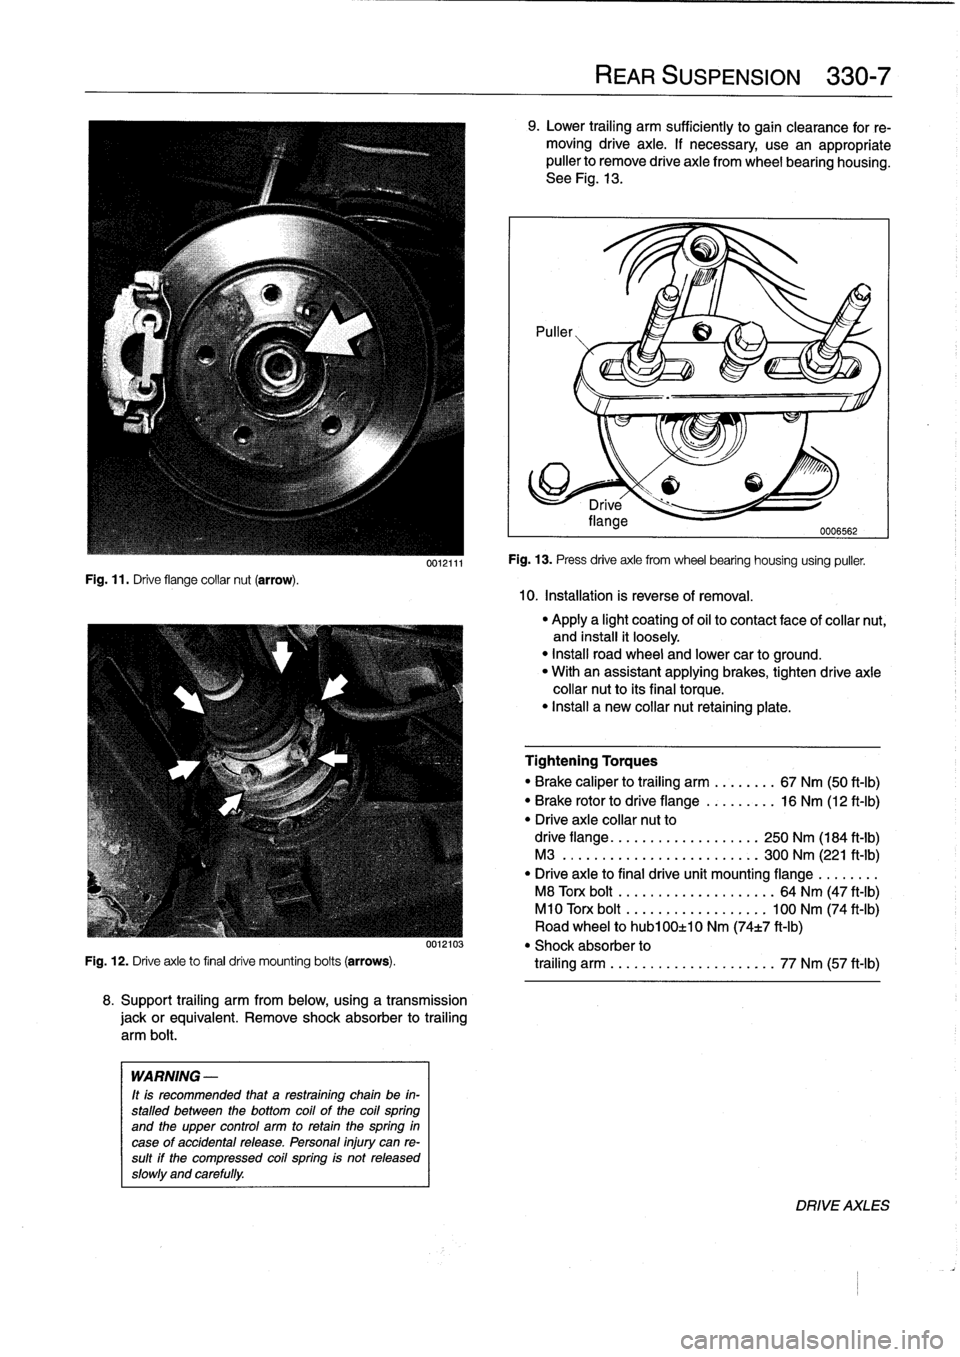 BMW 323i 1993 E36 Owners Guide 
Fig
.
11
.
Drive
flange
collar
nut
(arrow)
.

0012111

8
.
Support
trailing
arm
from
below,
using
a
transmission

jackorequivalent
.
Remove
shock
absorber
to
trailing

arm
bolt
.

WARNING
-

It
is
re